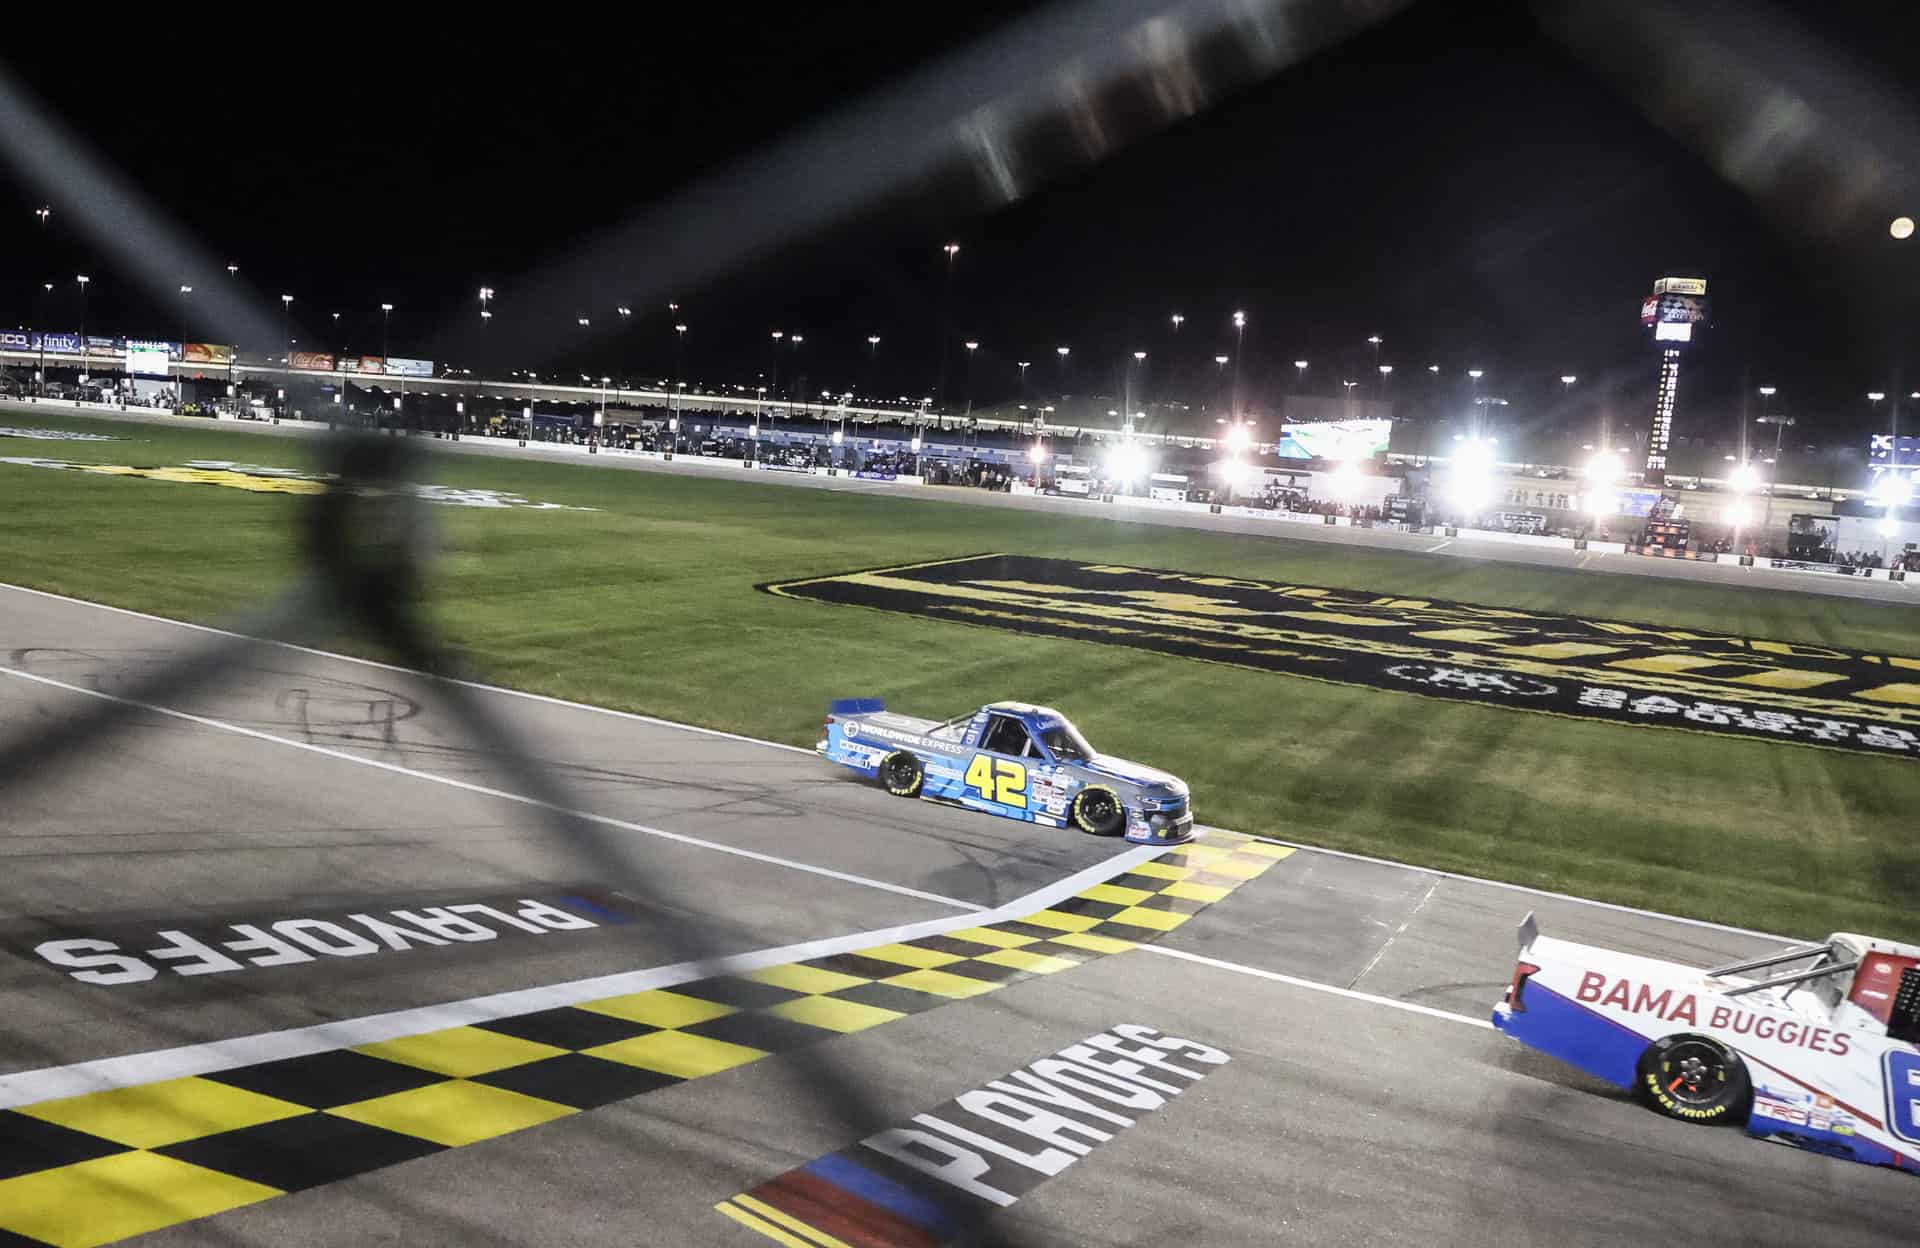 Carson Hocevar finishes second at Kansas Speedway in the 2022 Kansas Lottery 200 for Niece Motorsports in the NASCAR Camping World Truck Series.